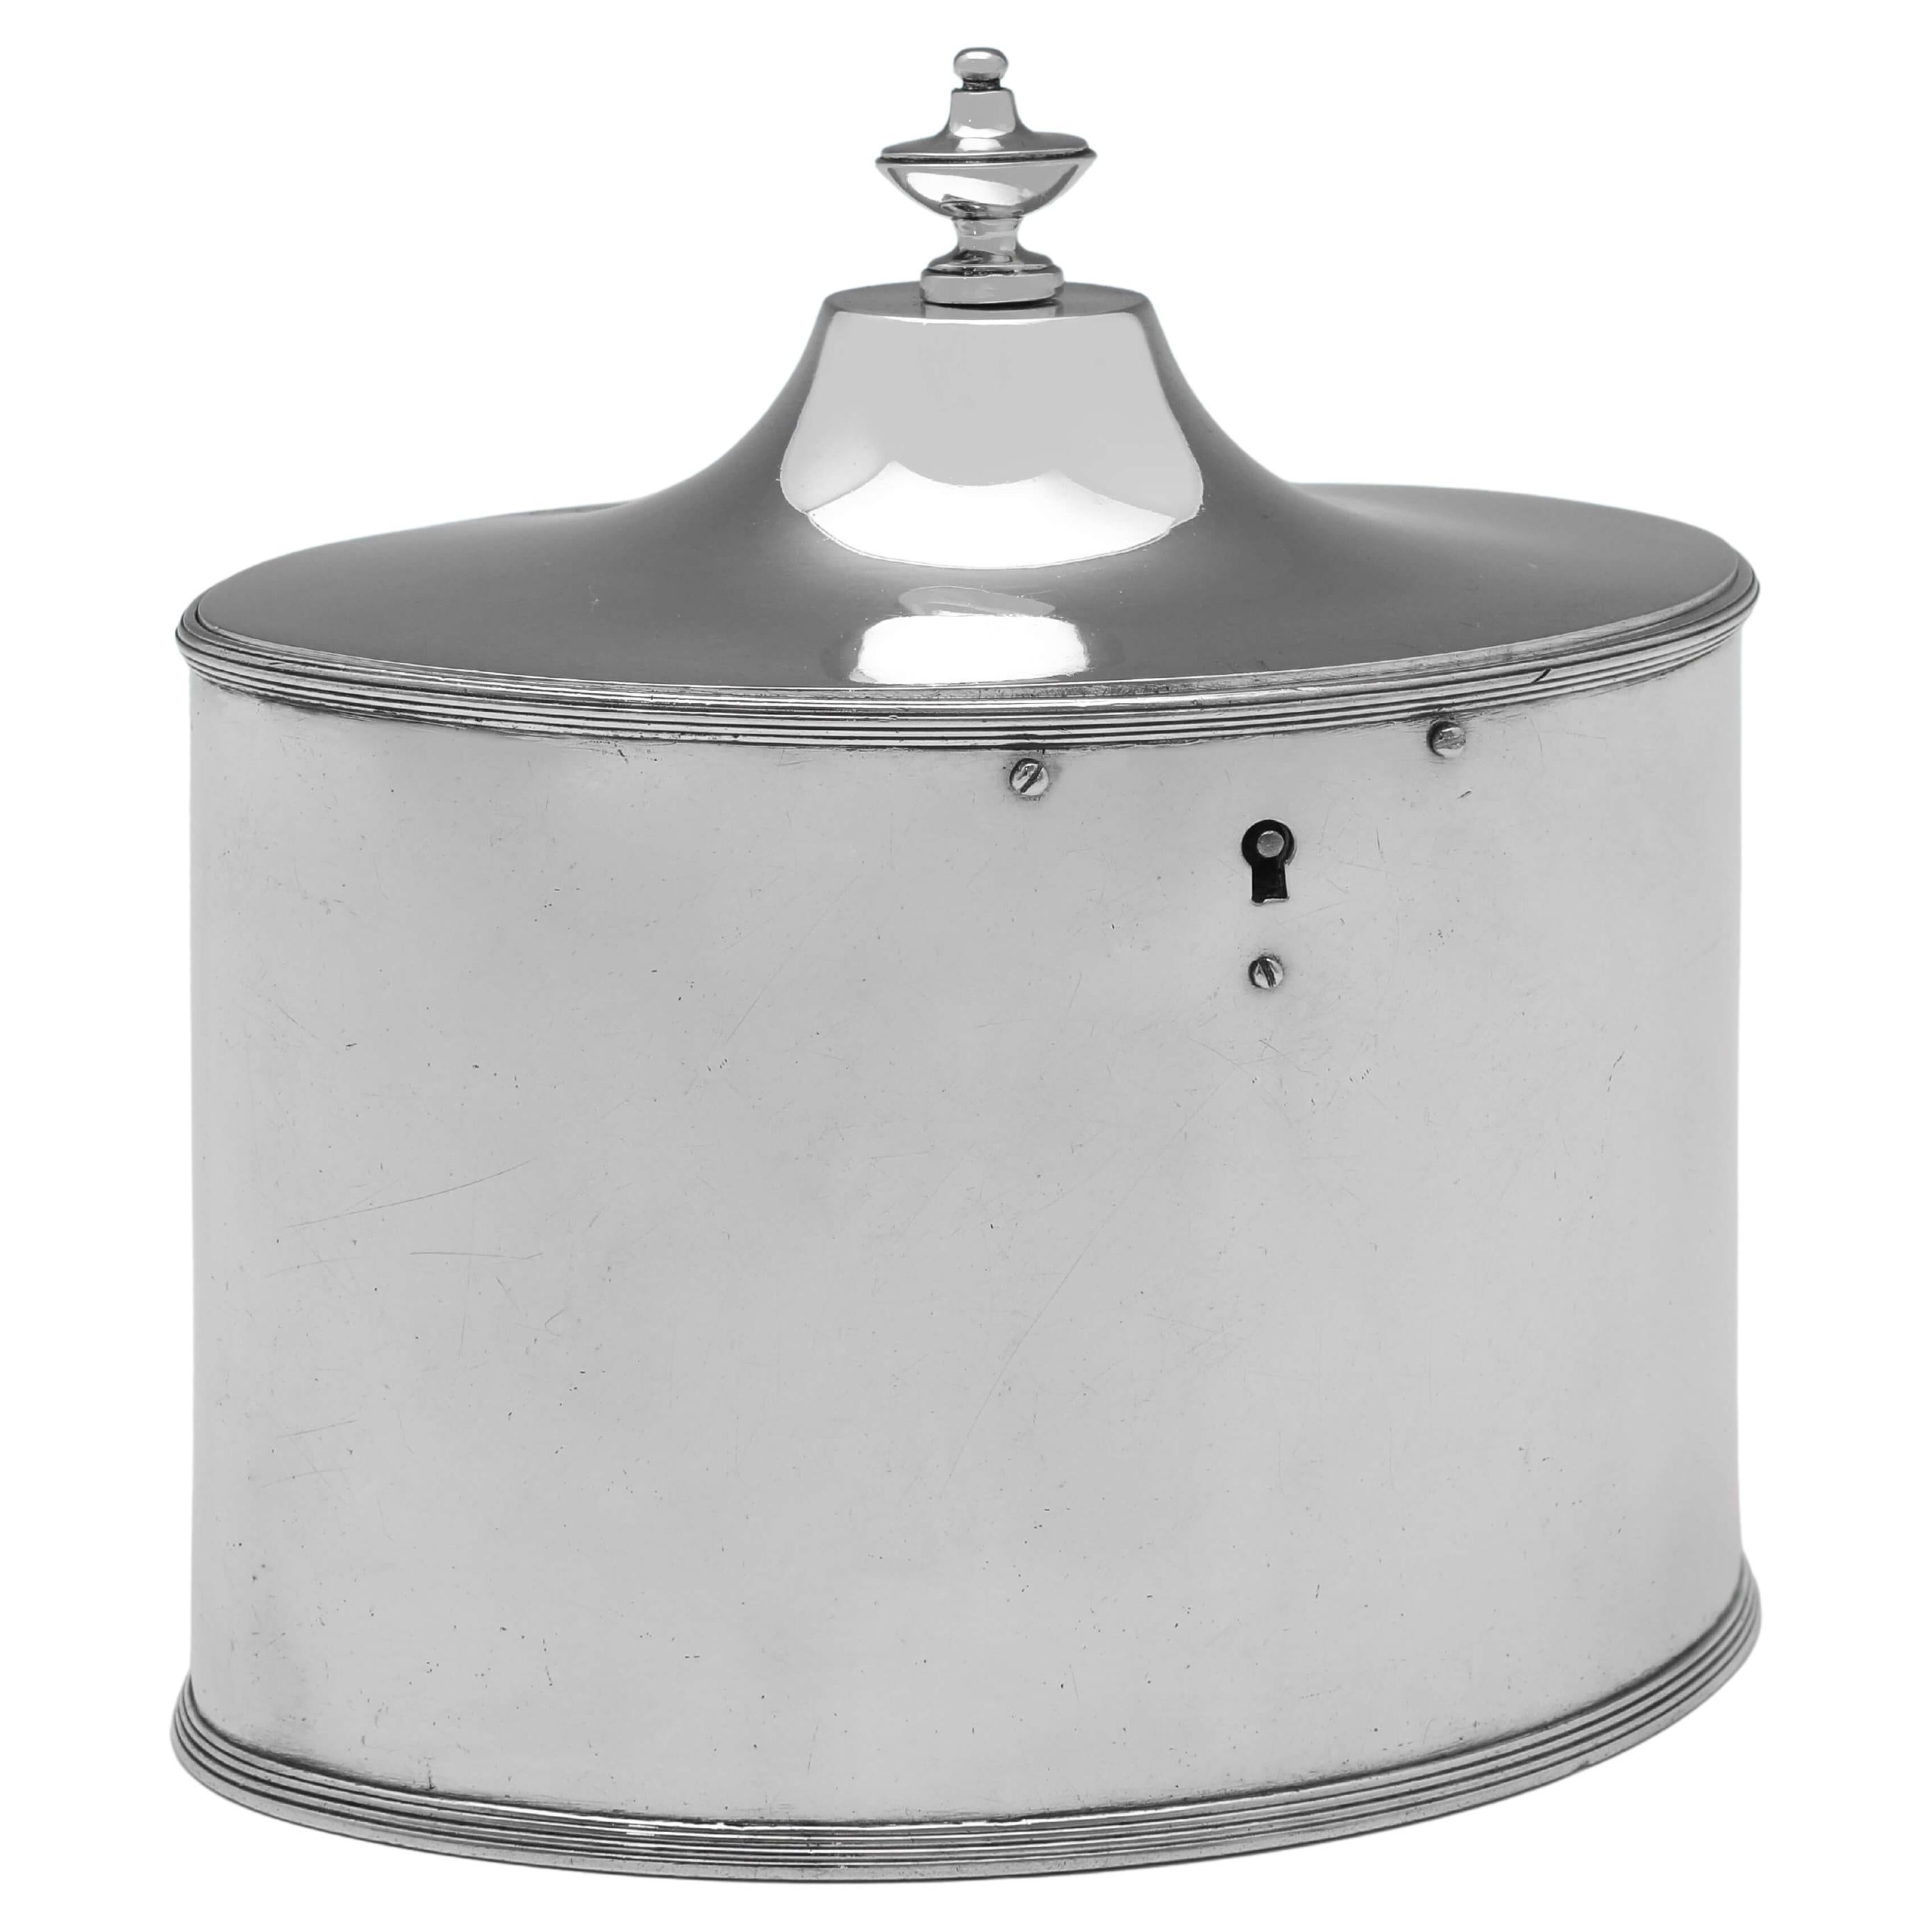 Hand Hammered Metal Tea Caddy Oval with Finial Lid and Silver Finish